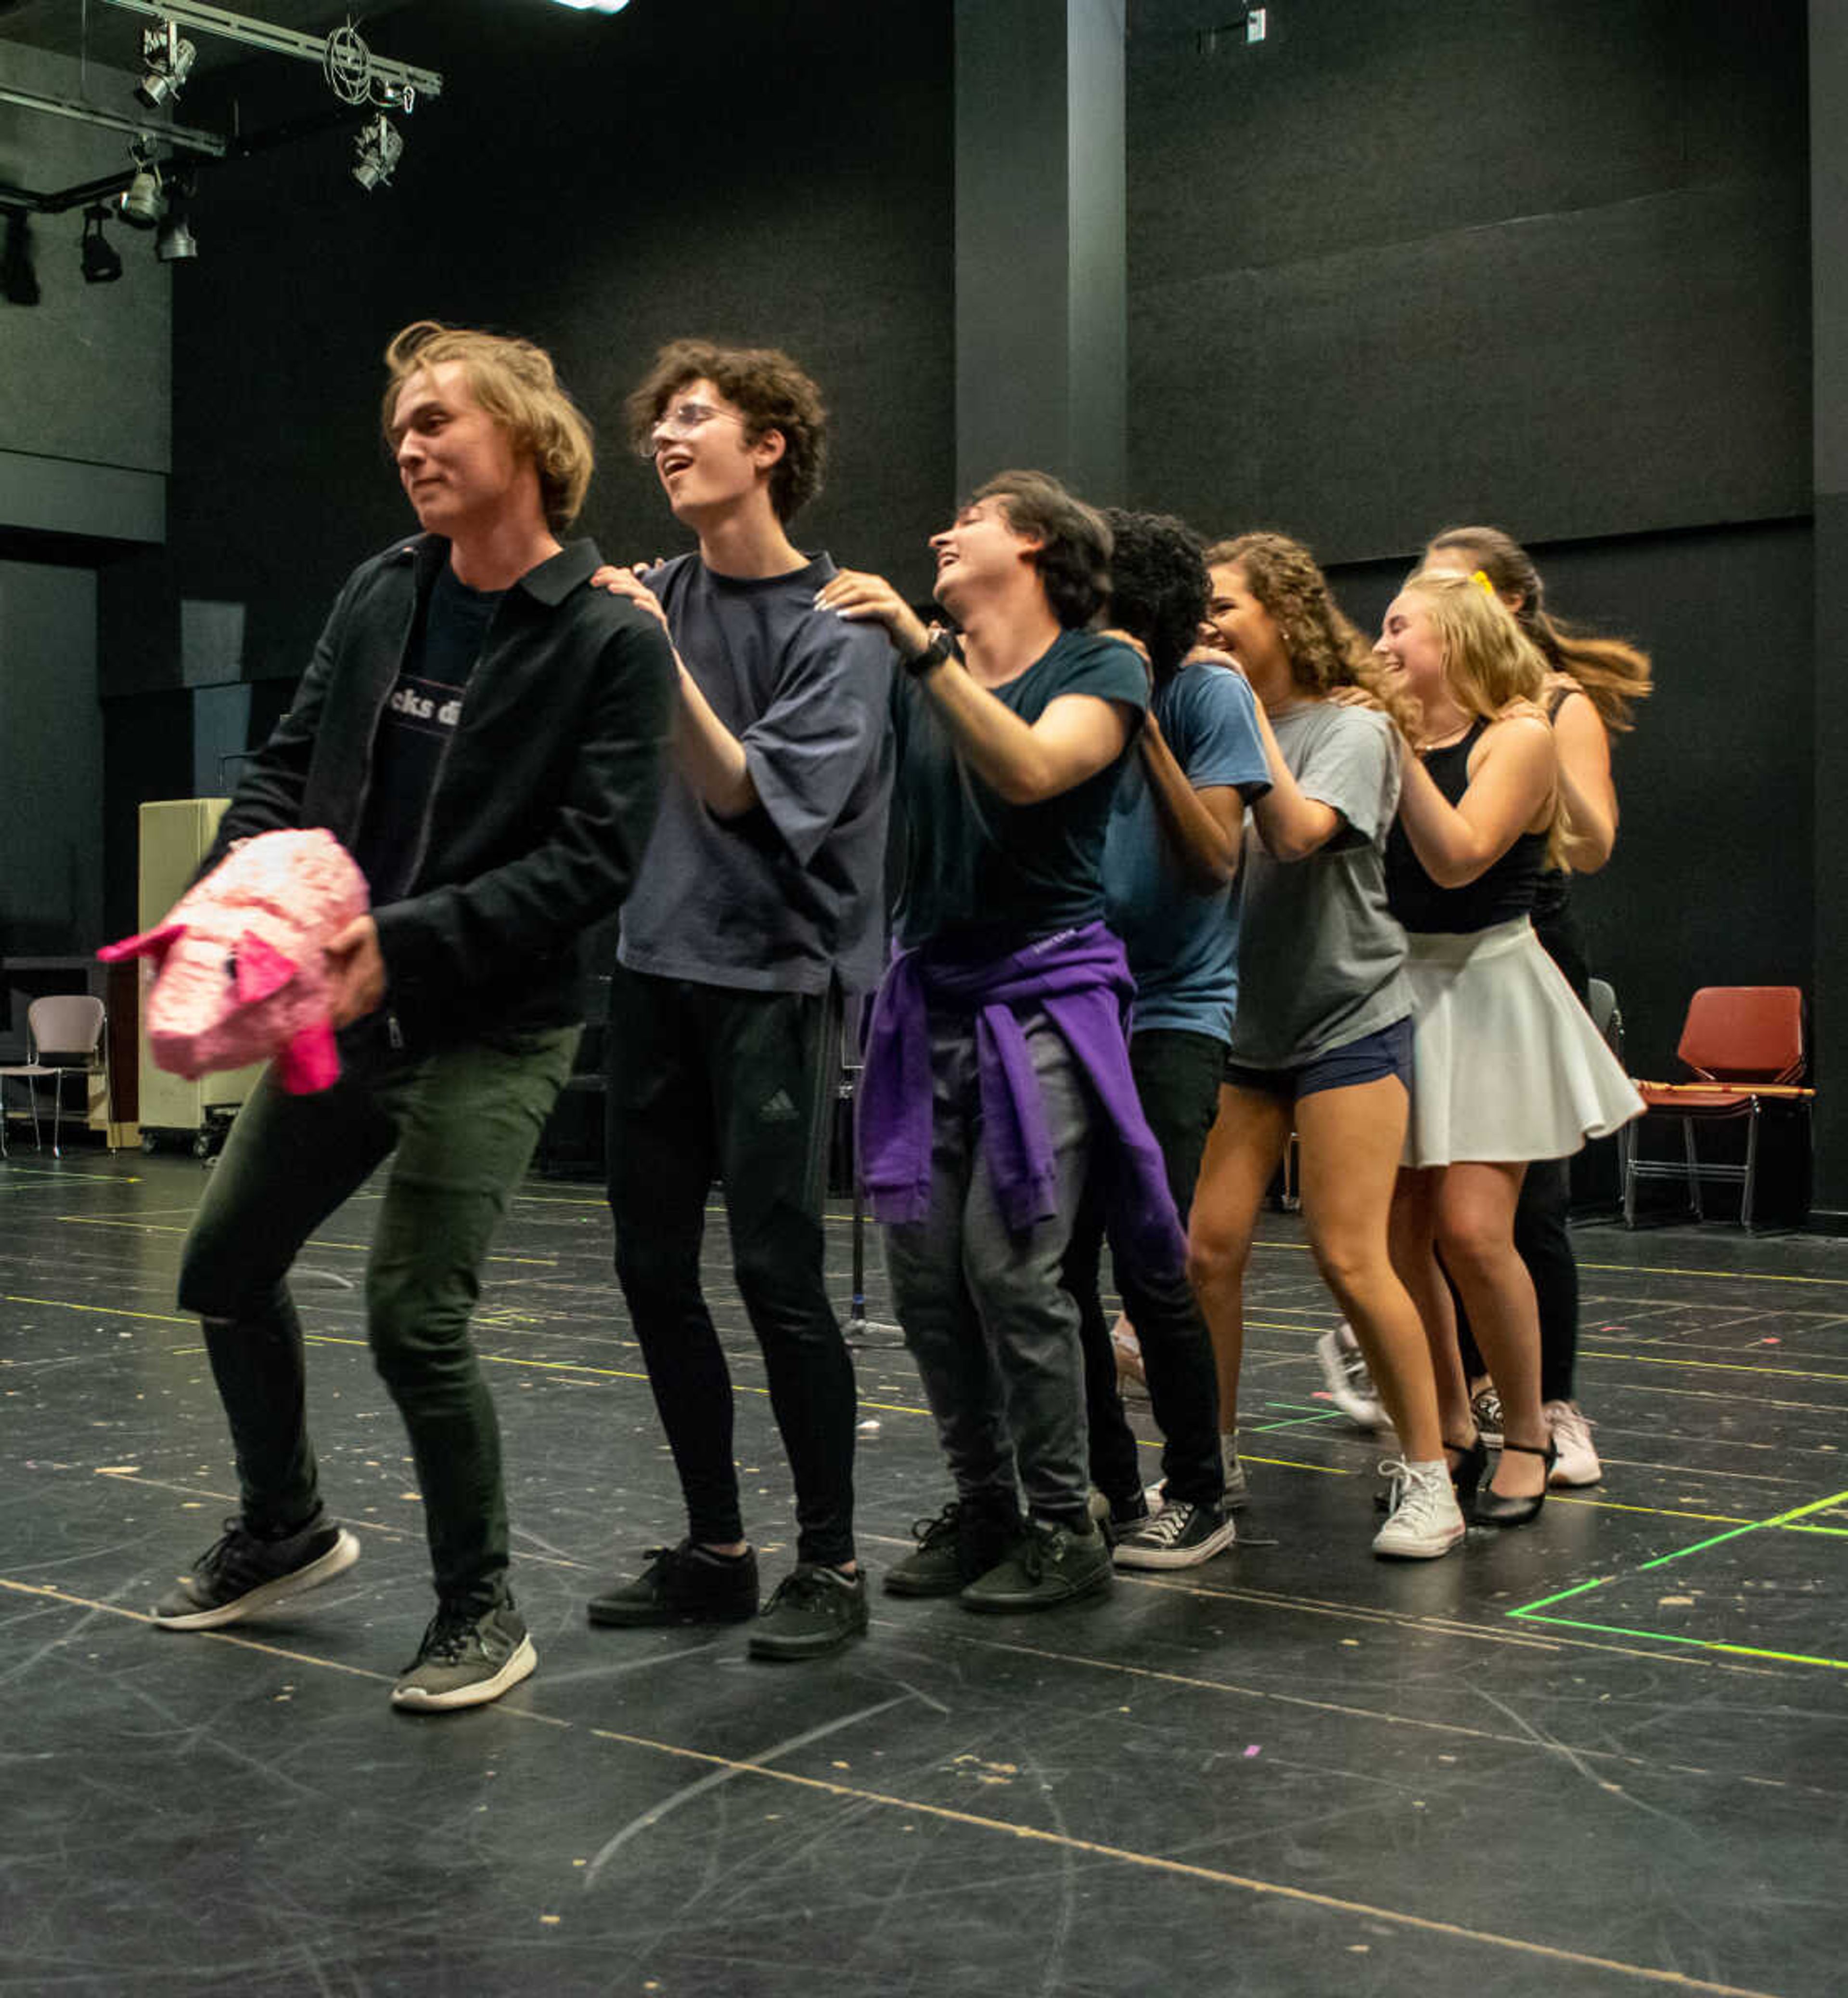 River Campus’ “Heathers” Cast Welcomes Audiences to the “Candy Store”